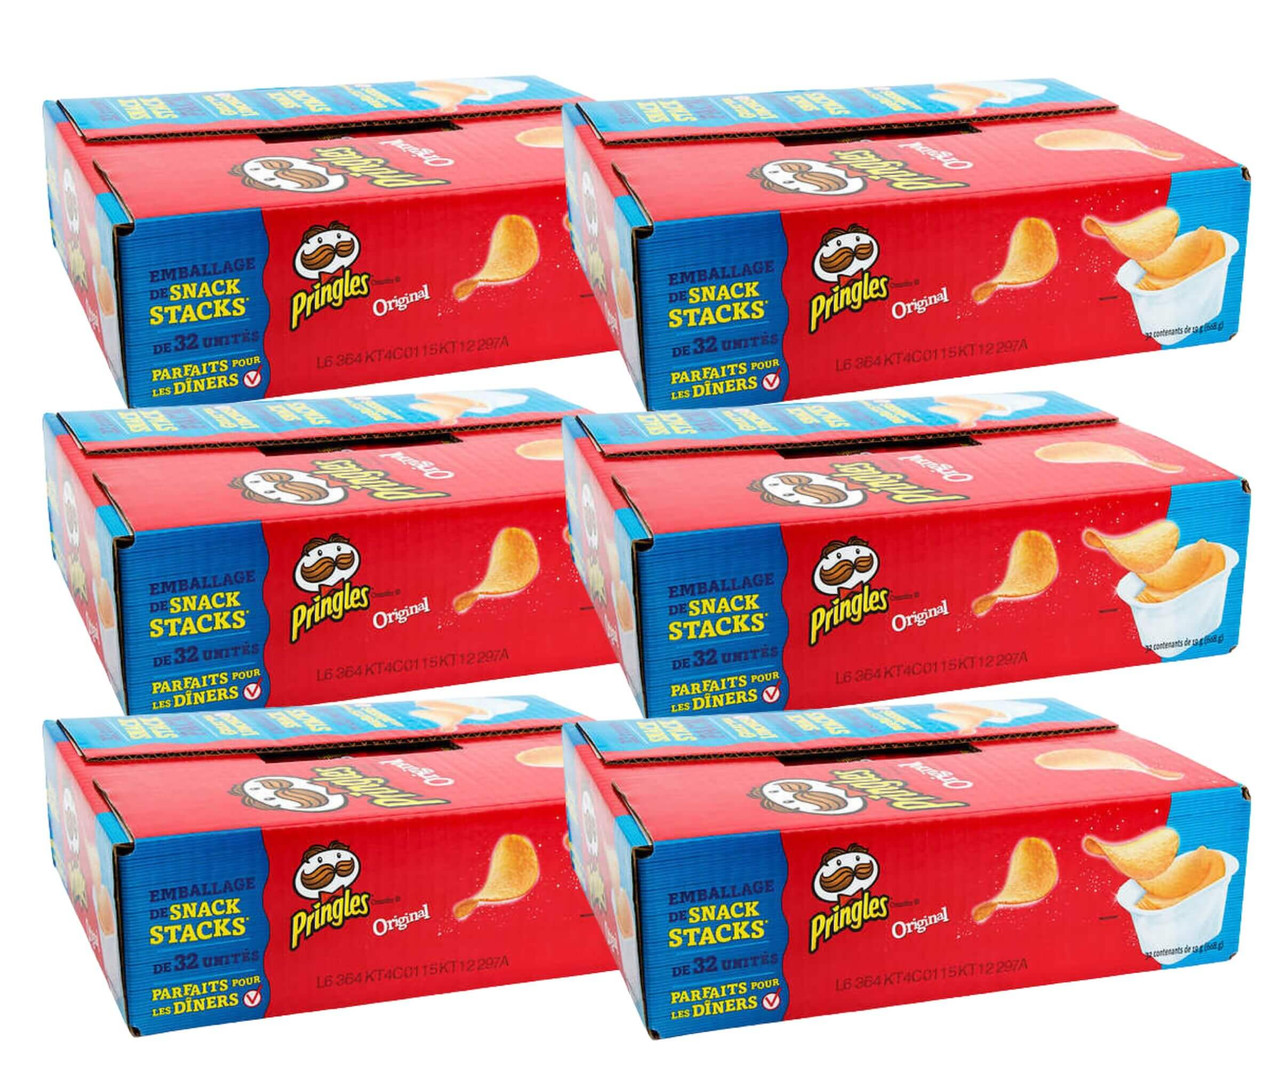 Pringles Snack Stacks Chips, Original, 32-pack - (6/CASE)-Chicken Pieces